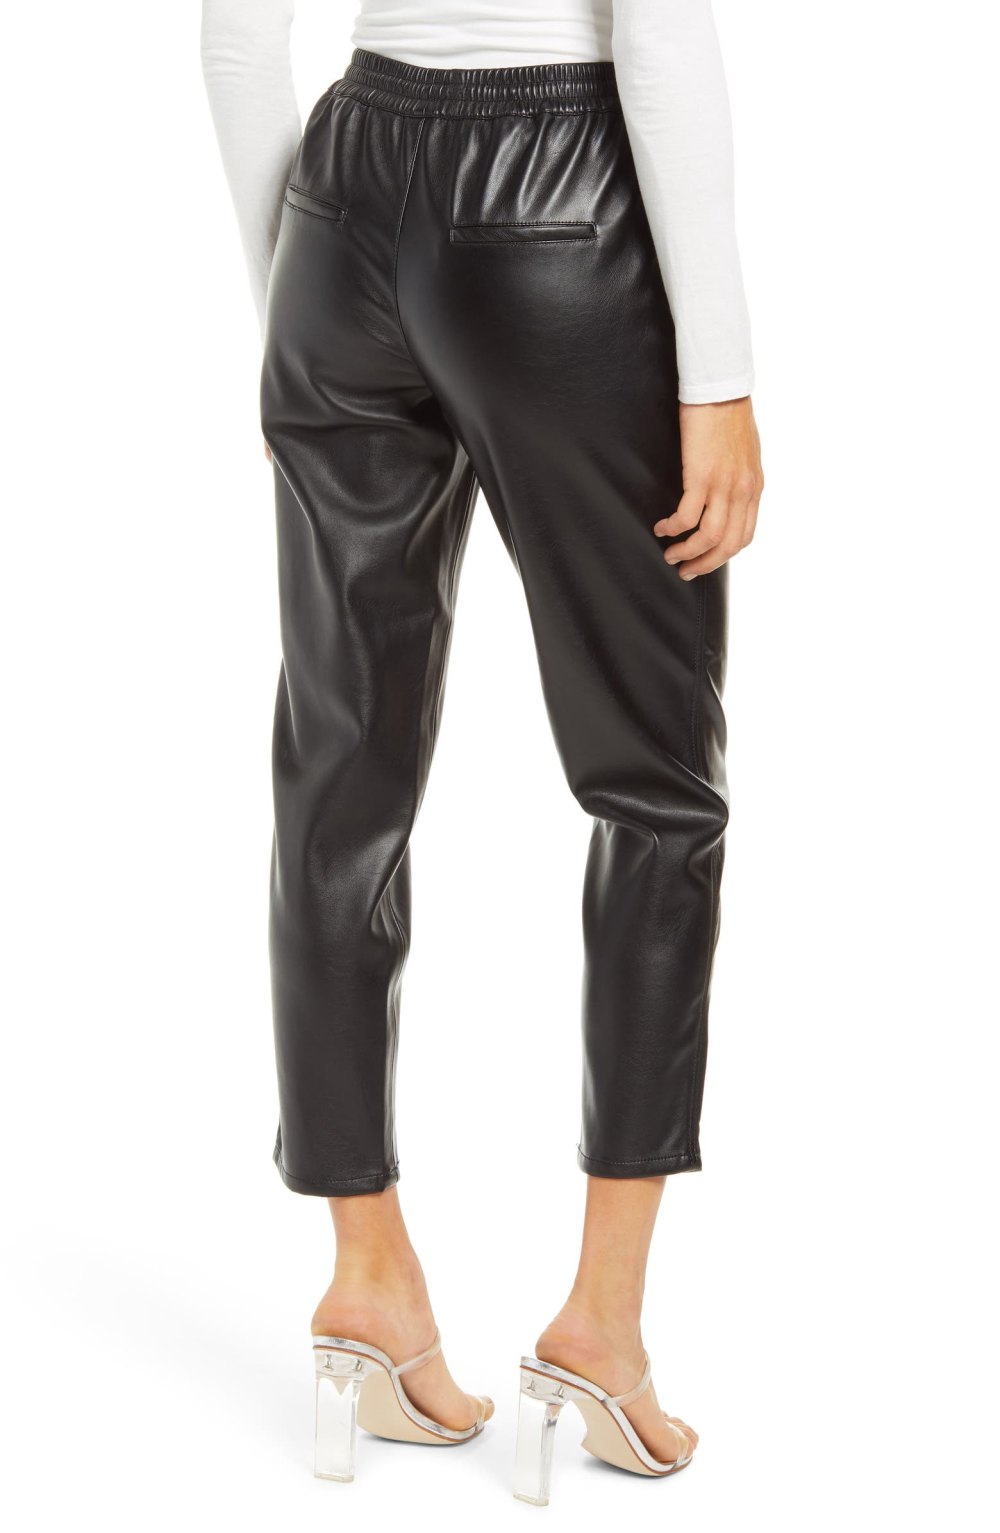 7 Faux-Leather Leggings That May Rival Spanx — And Are Half the Price